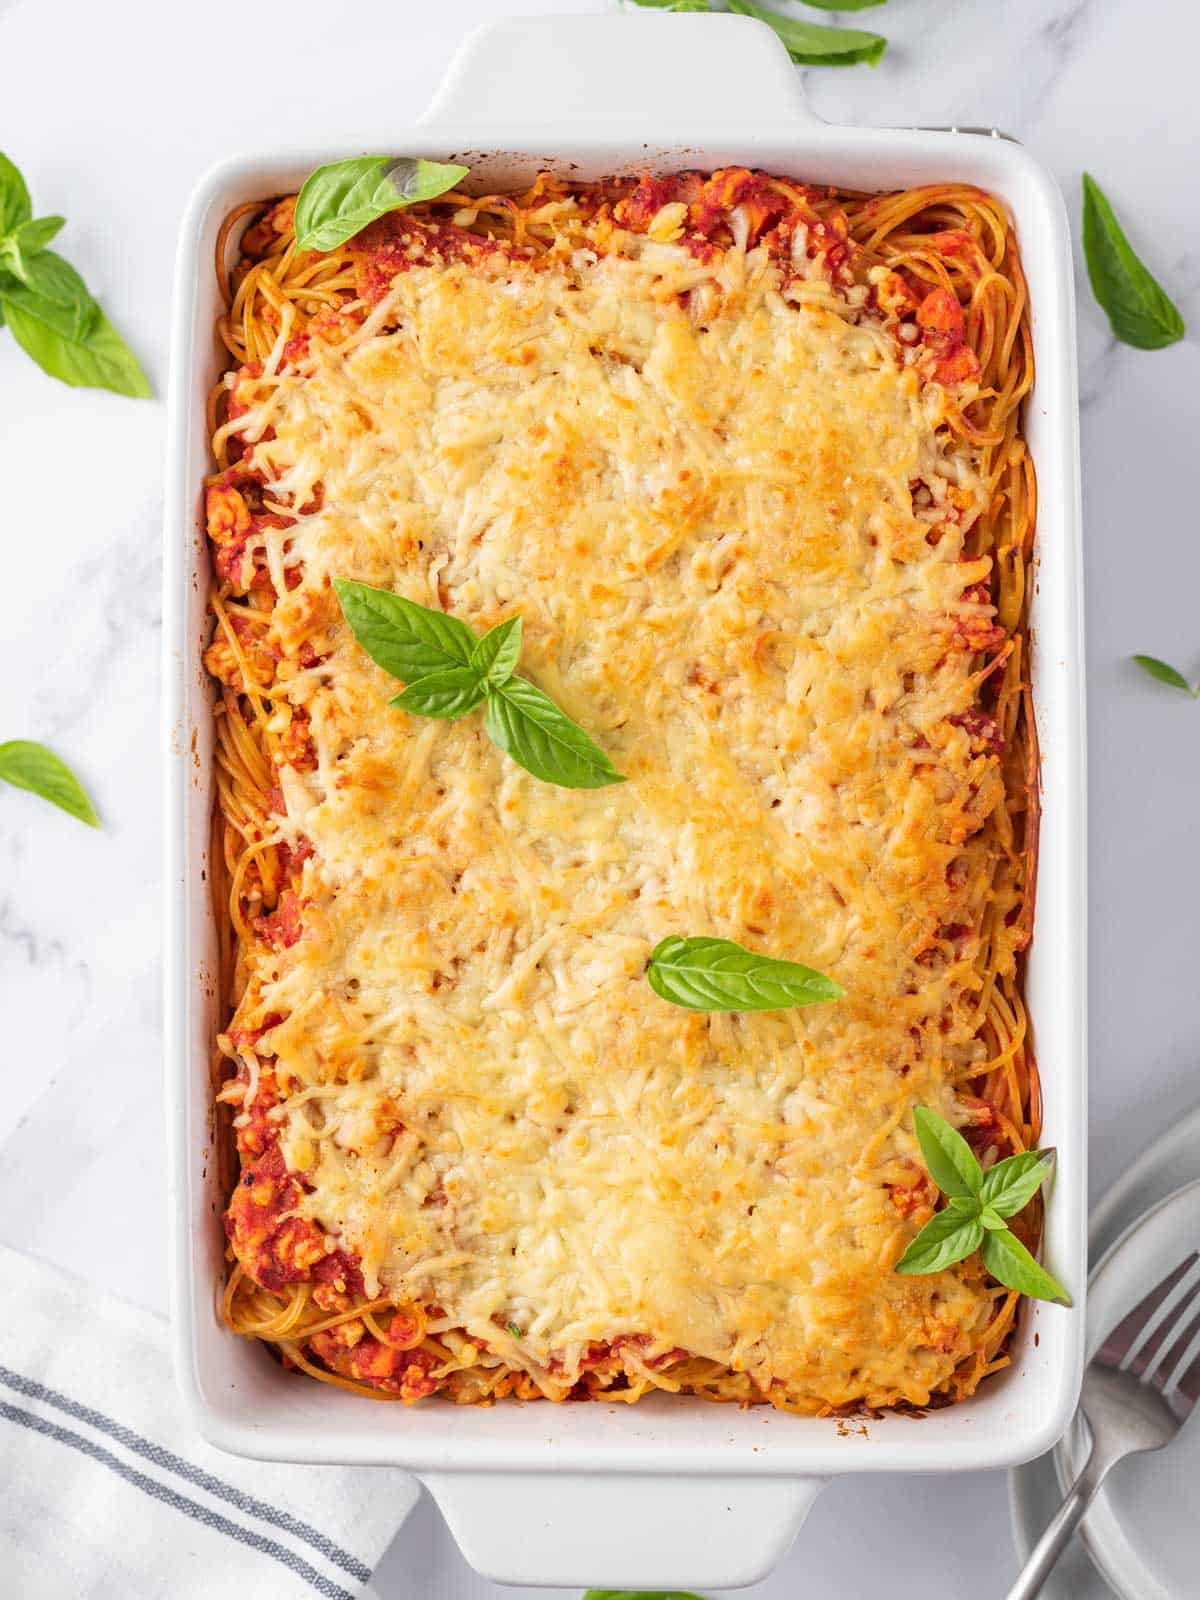 Easy Spaghetti Pasta Bake after cooking, topped with basil leaves.